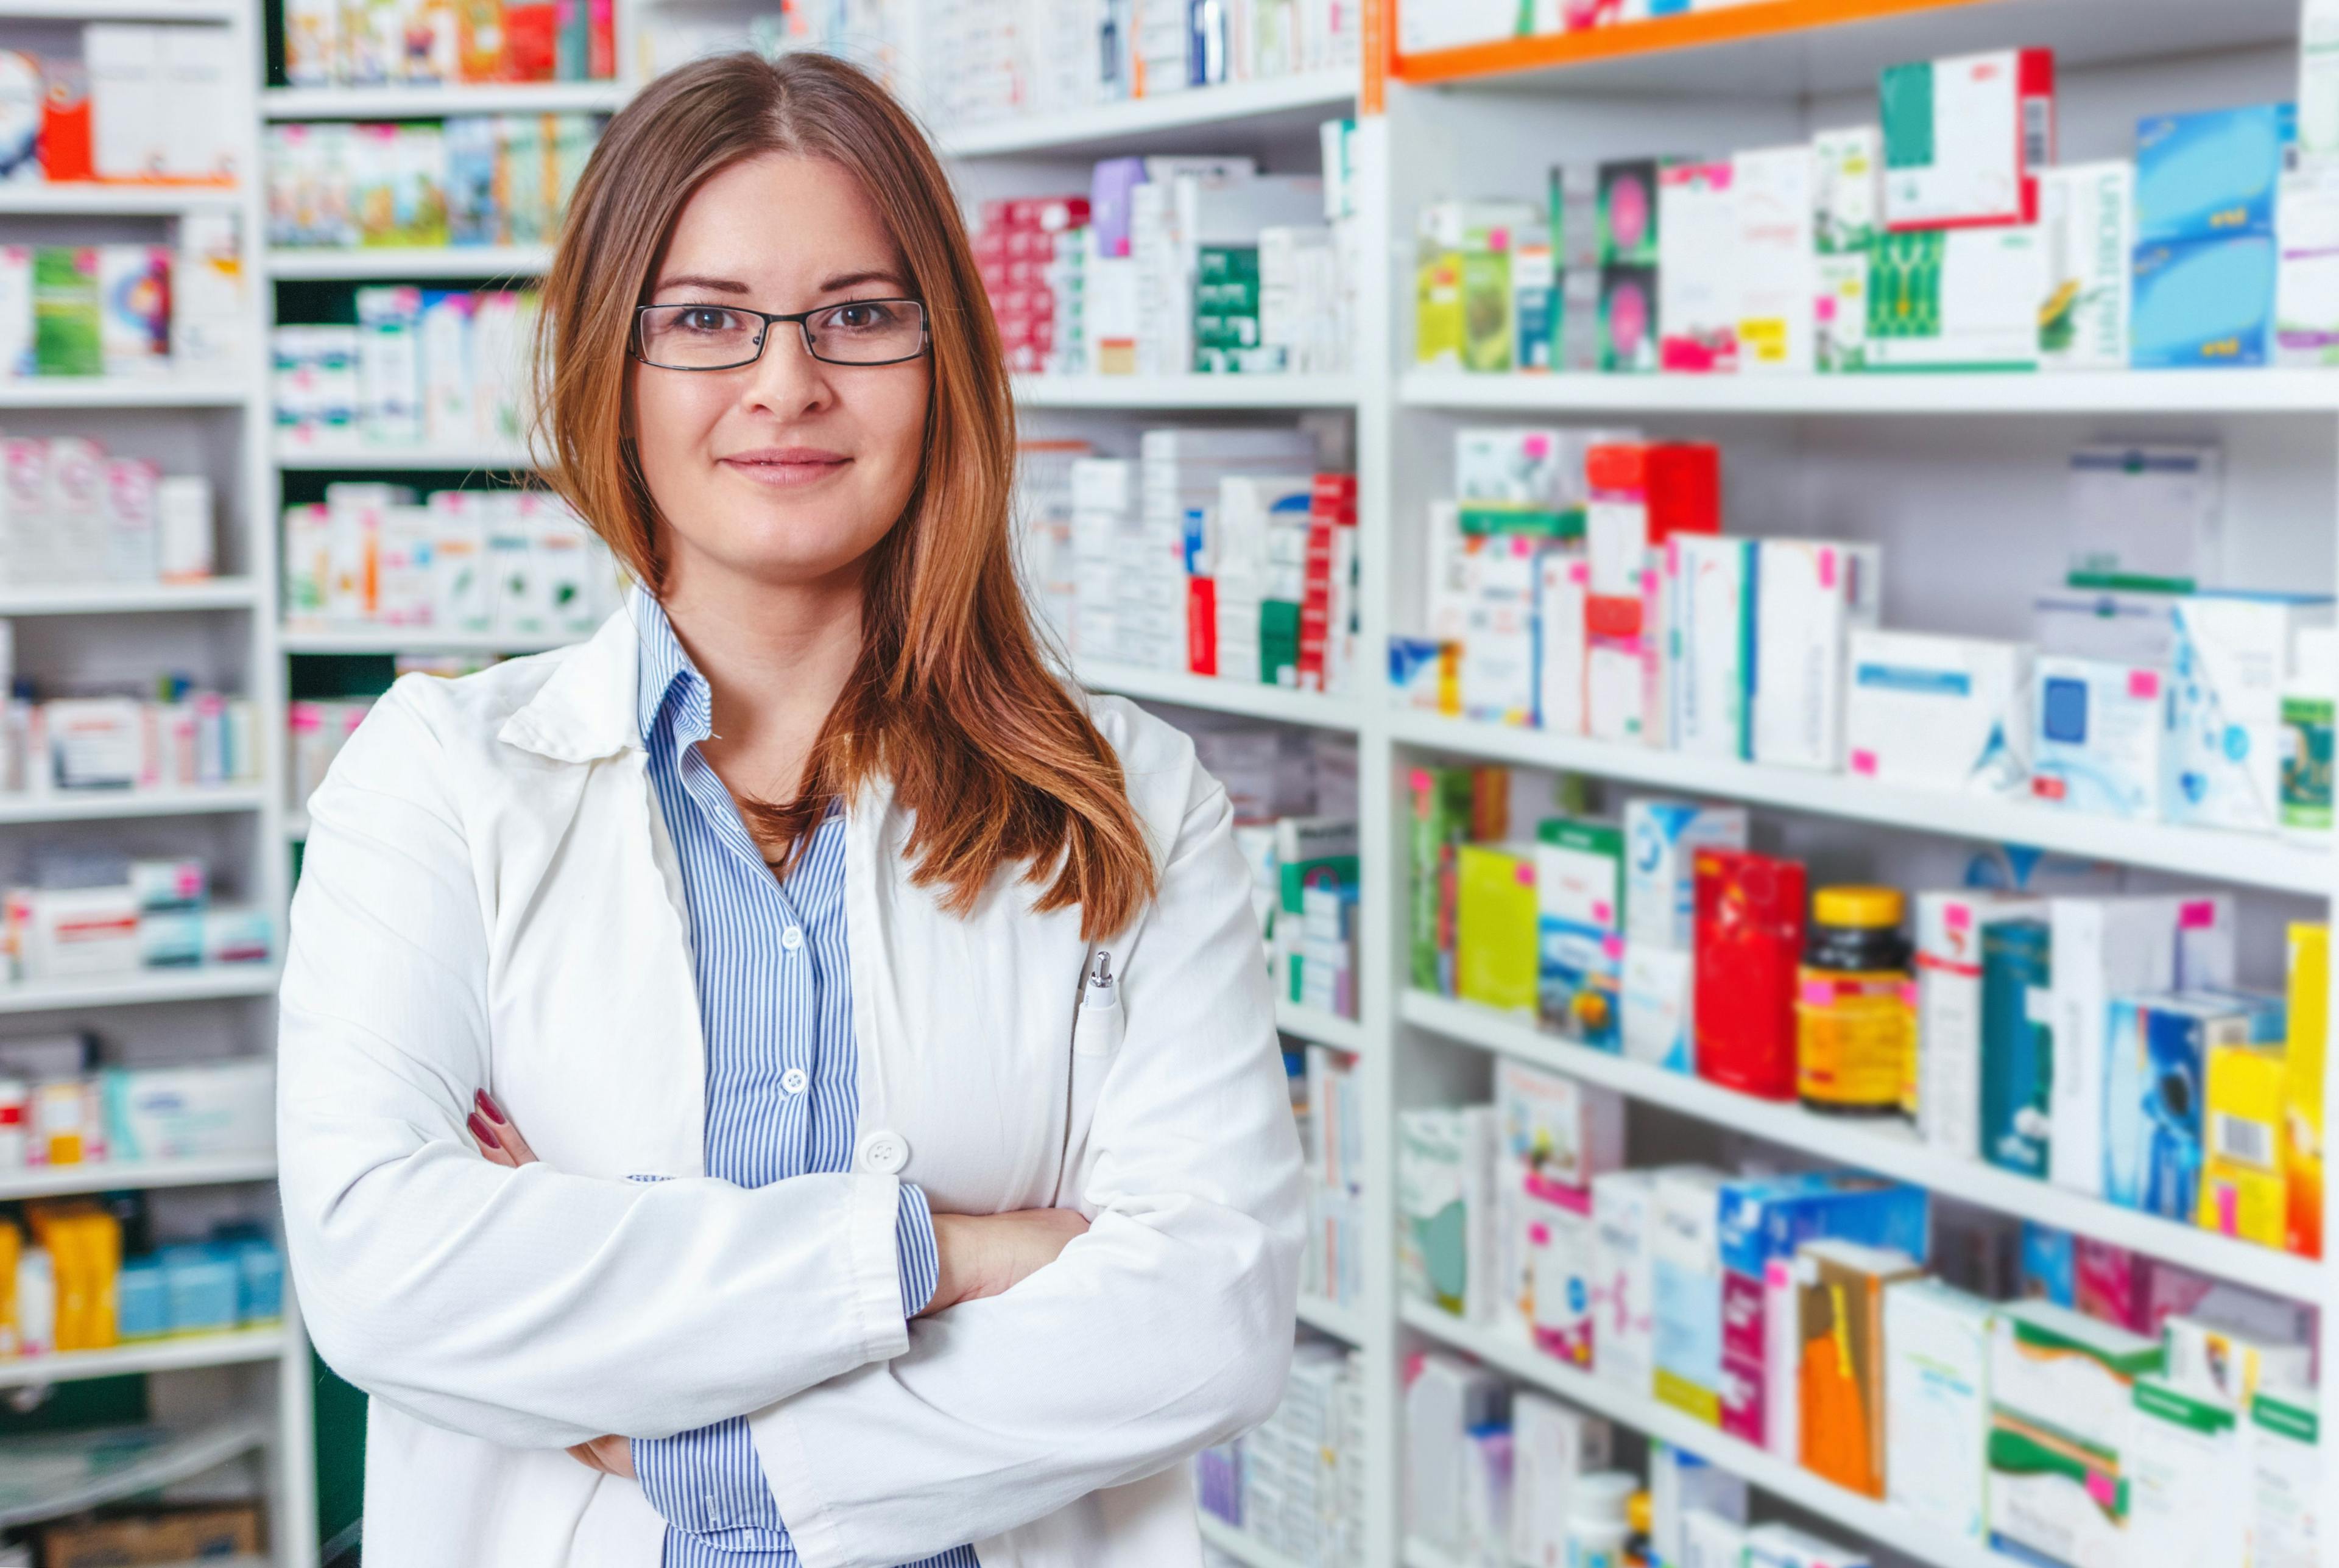 Women in Pharmacy Make Their Mark on the Profession